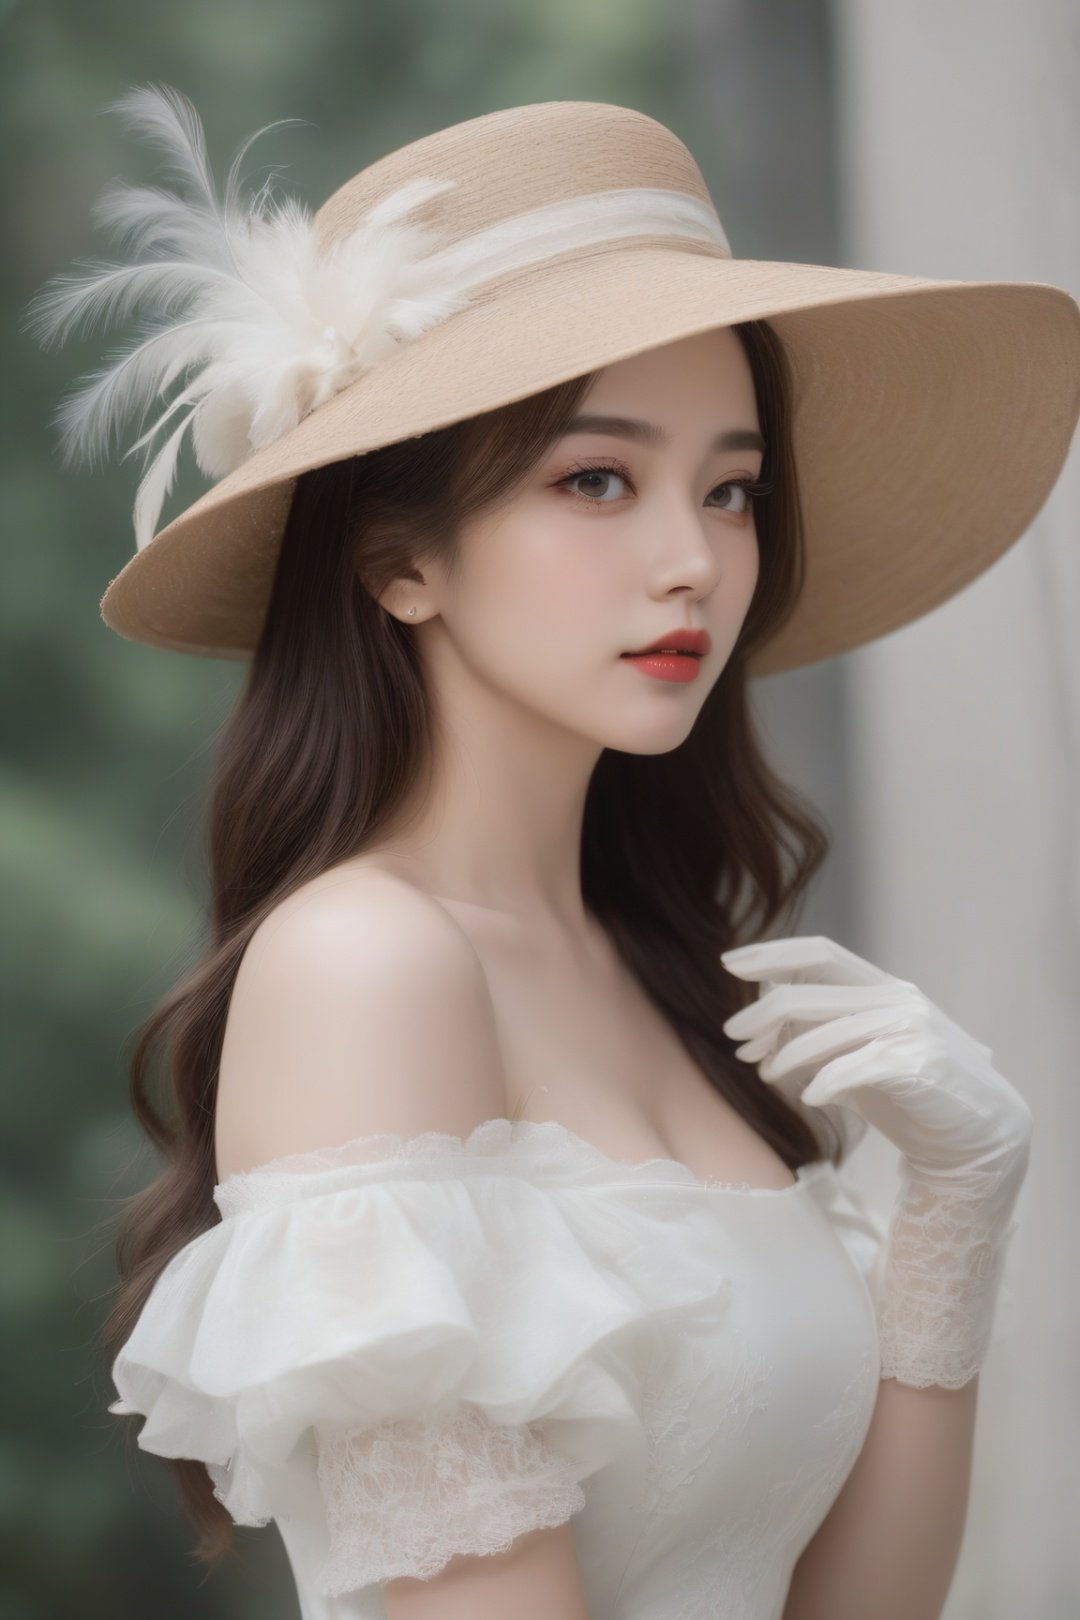 1girl,outdoors,solo,.sexy pose,pensive woman,voluminous dress,intricate lace,embroidered gloves,feathered hat,curled hairdo,pale skin,minimal makeup,tender smile,dainty neckline,nostalgic atmosphere,still life,
black hair,black pupil,red lips,,